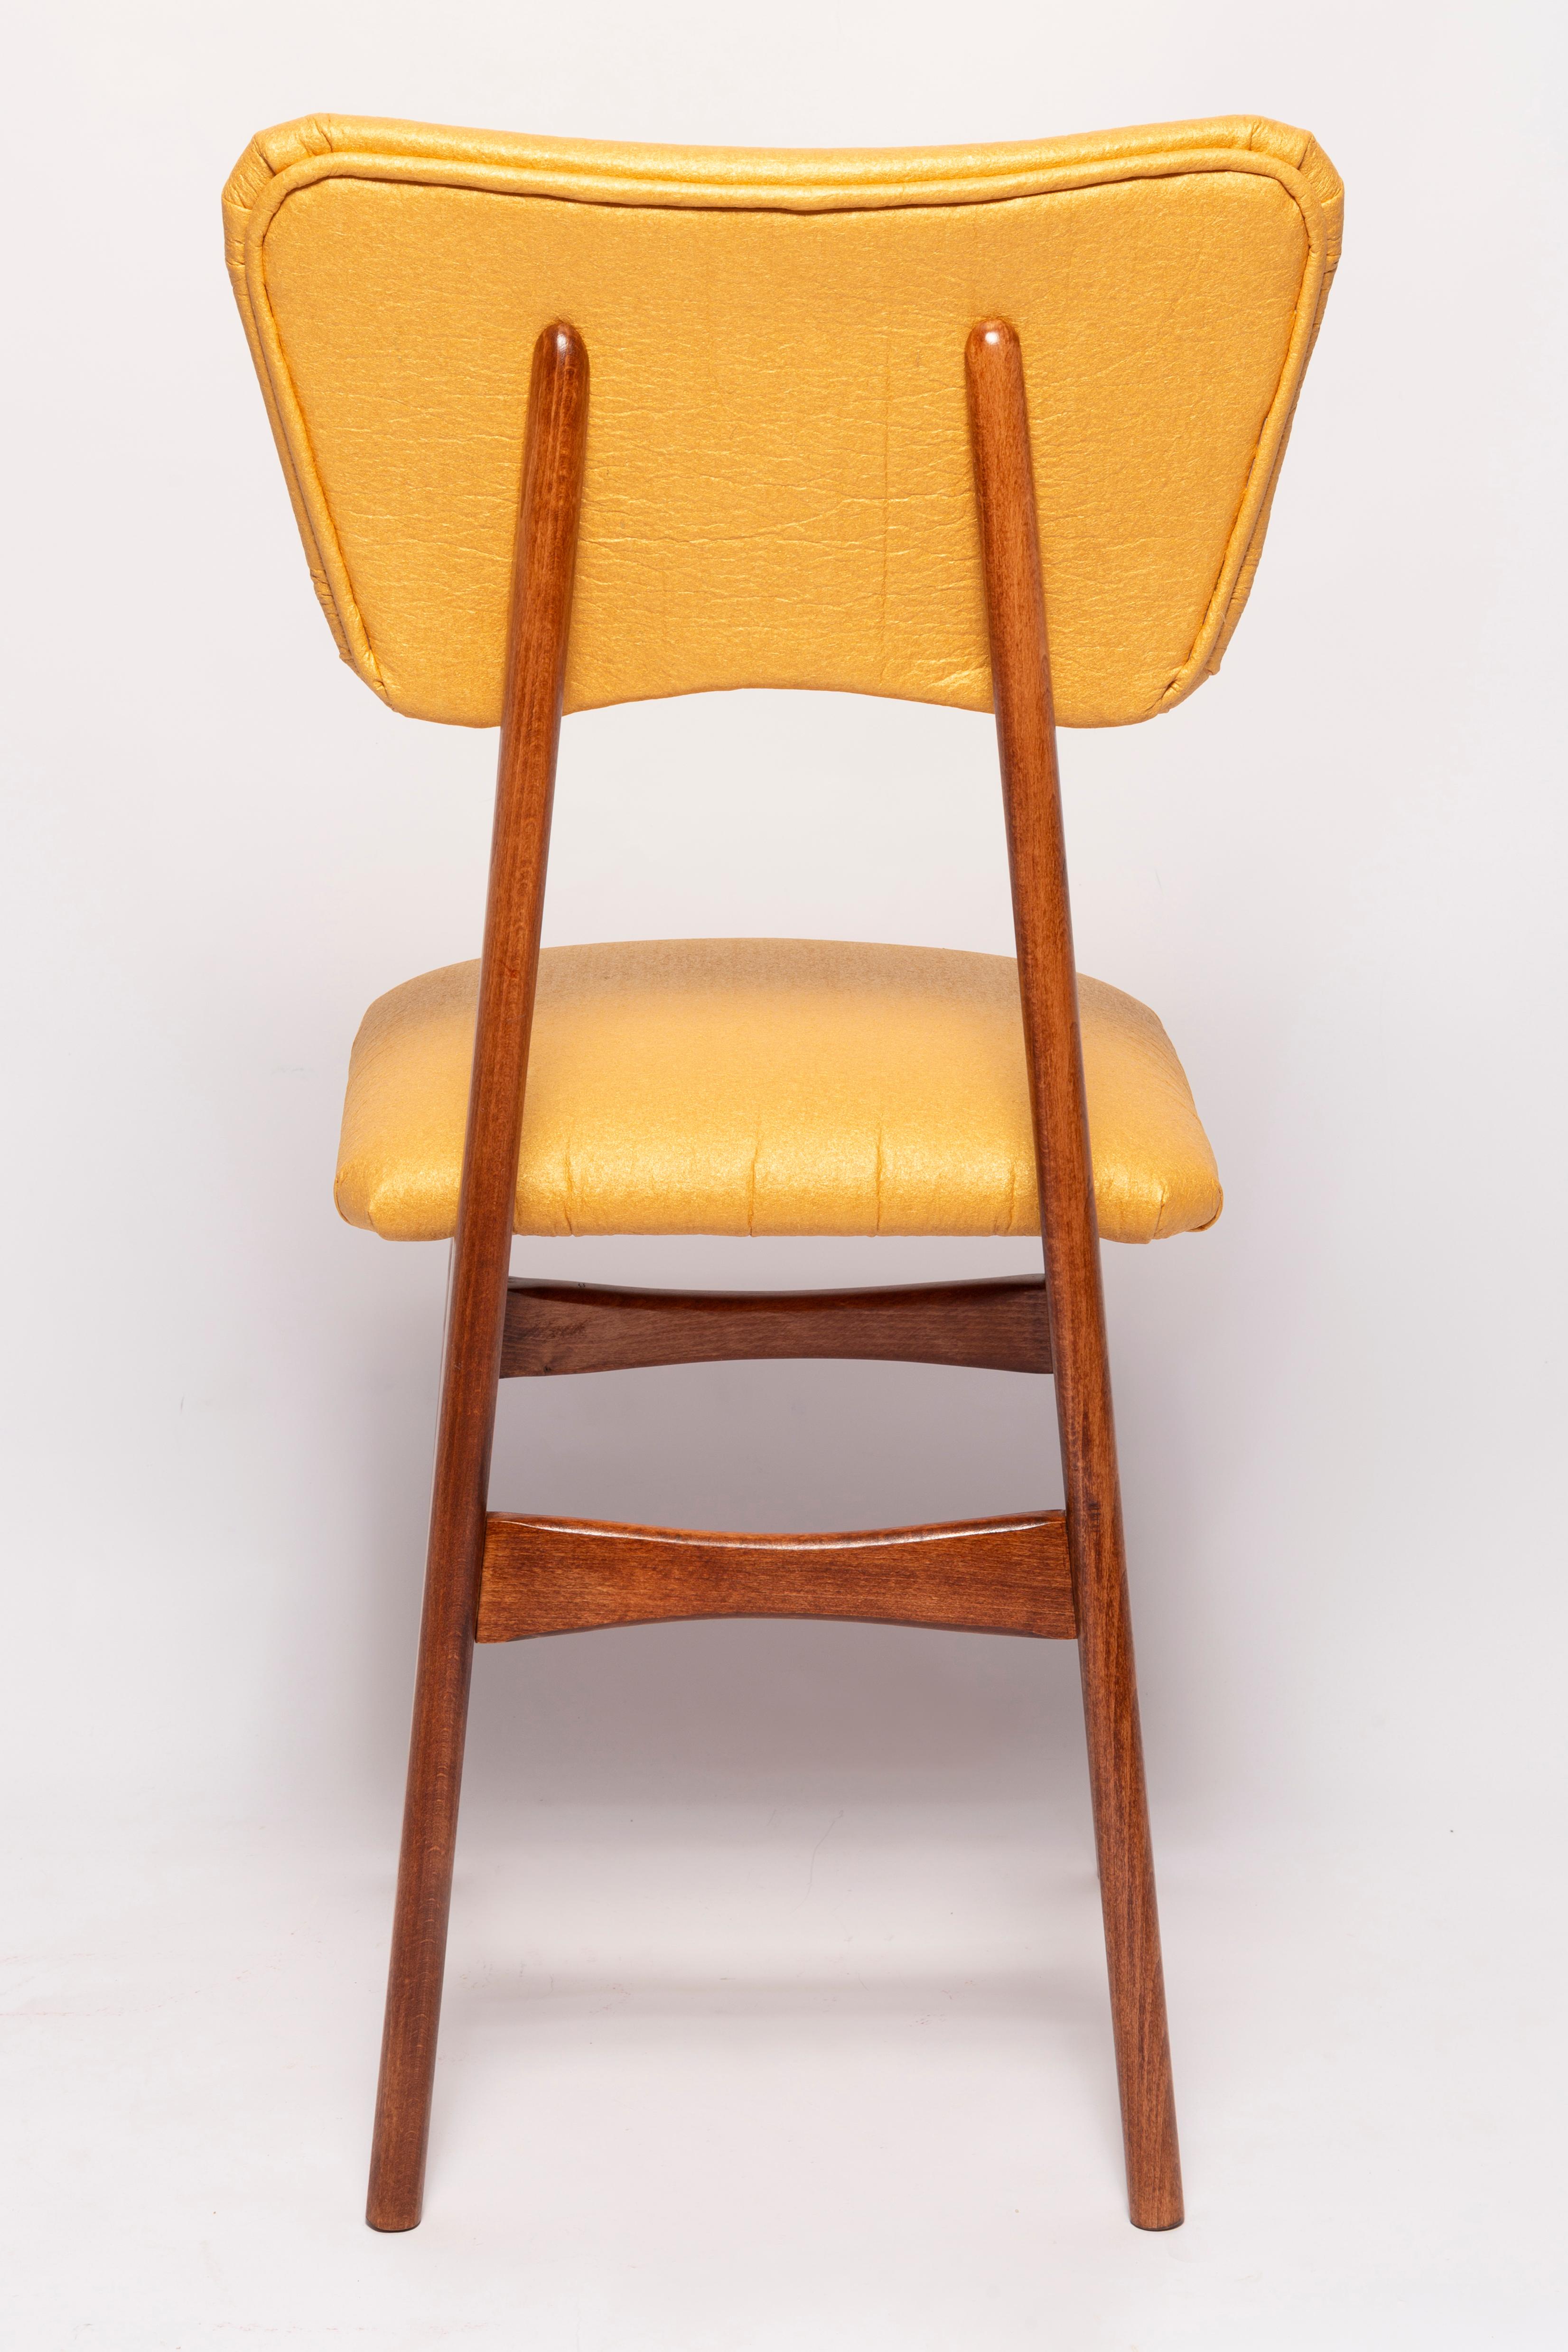 Mid Century Butterfly Dining Chair, Pineapple Vegan Leather, Europe, 1960s For Sale 5